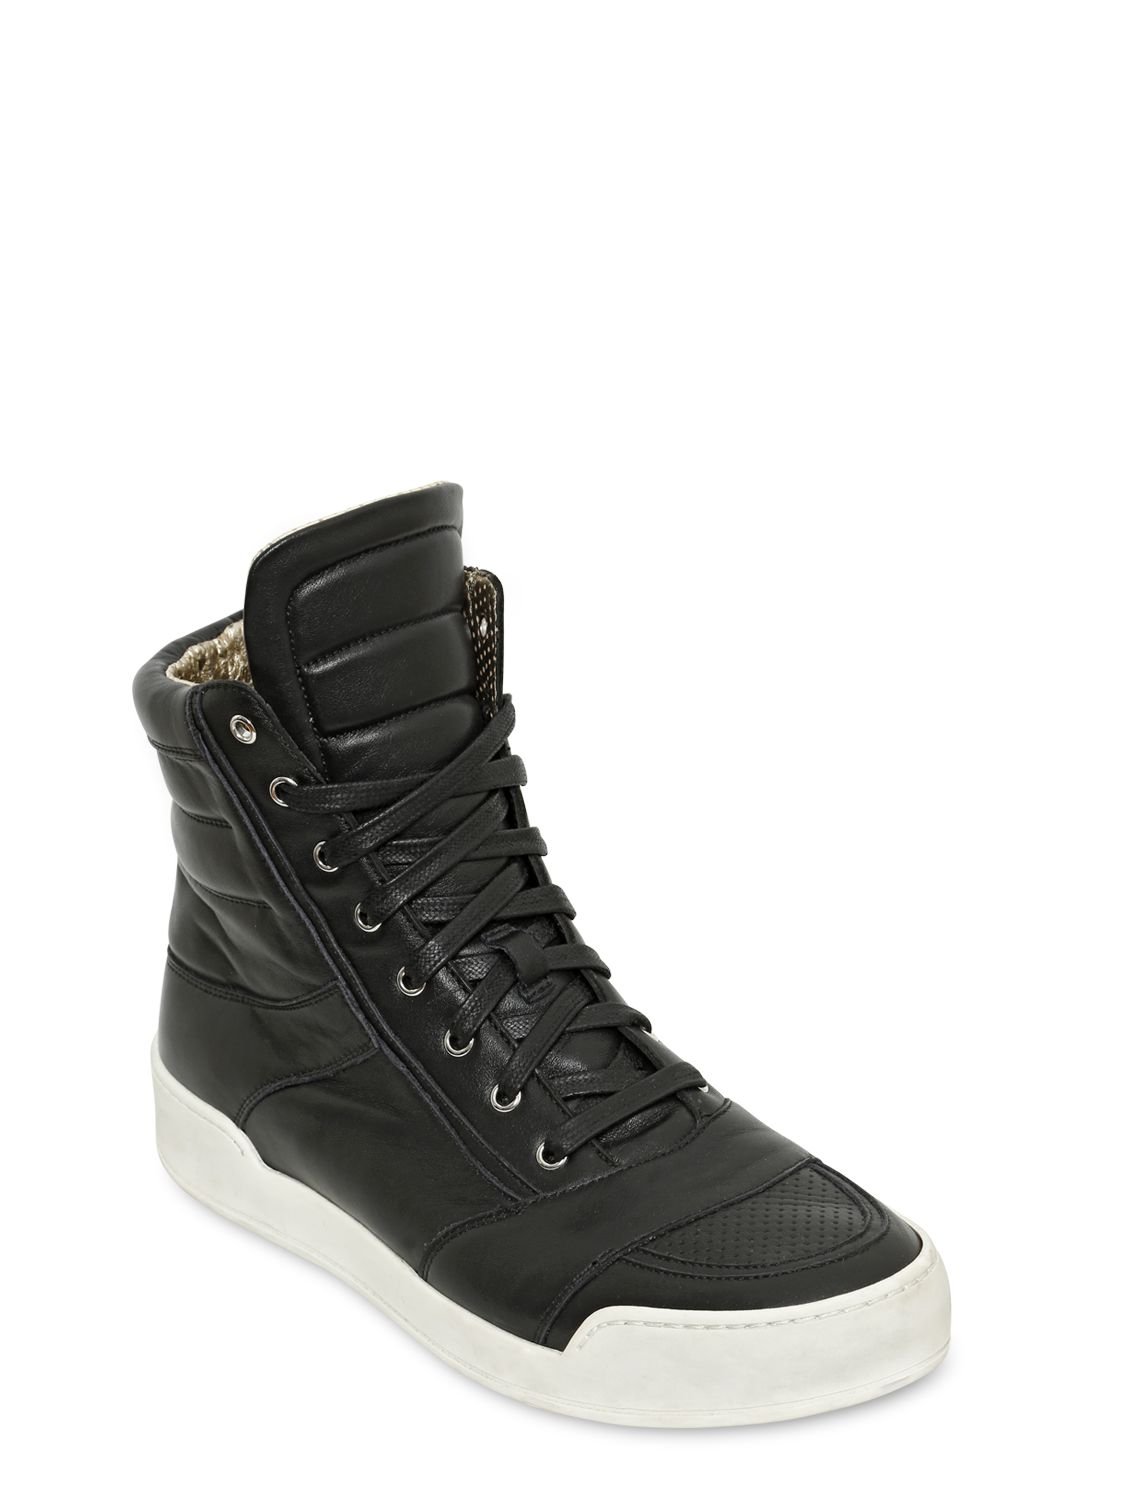 Balmain Leather High Sneakers in for Men | Lyst